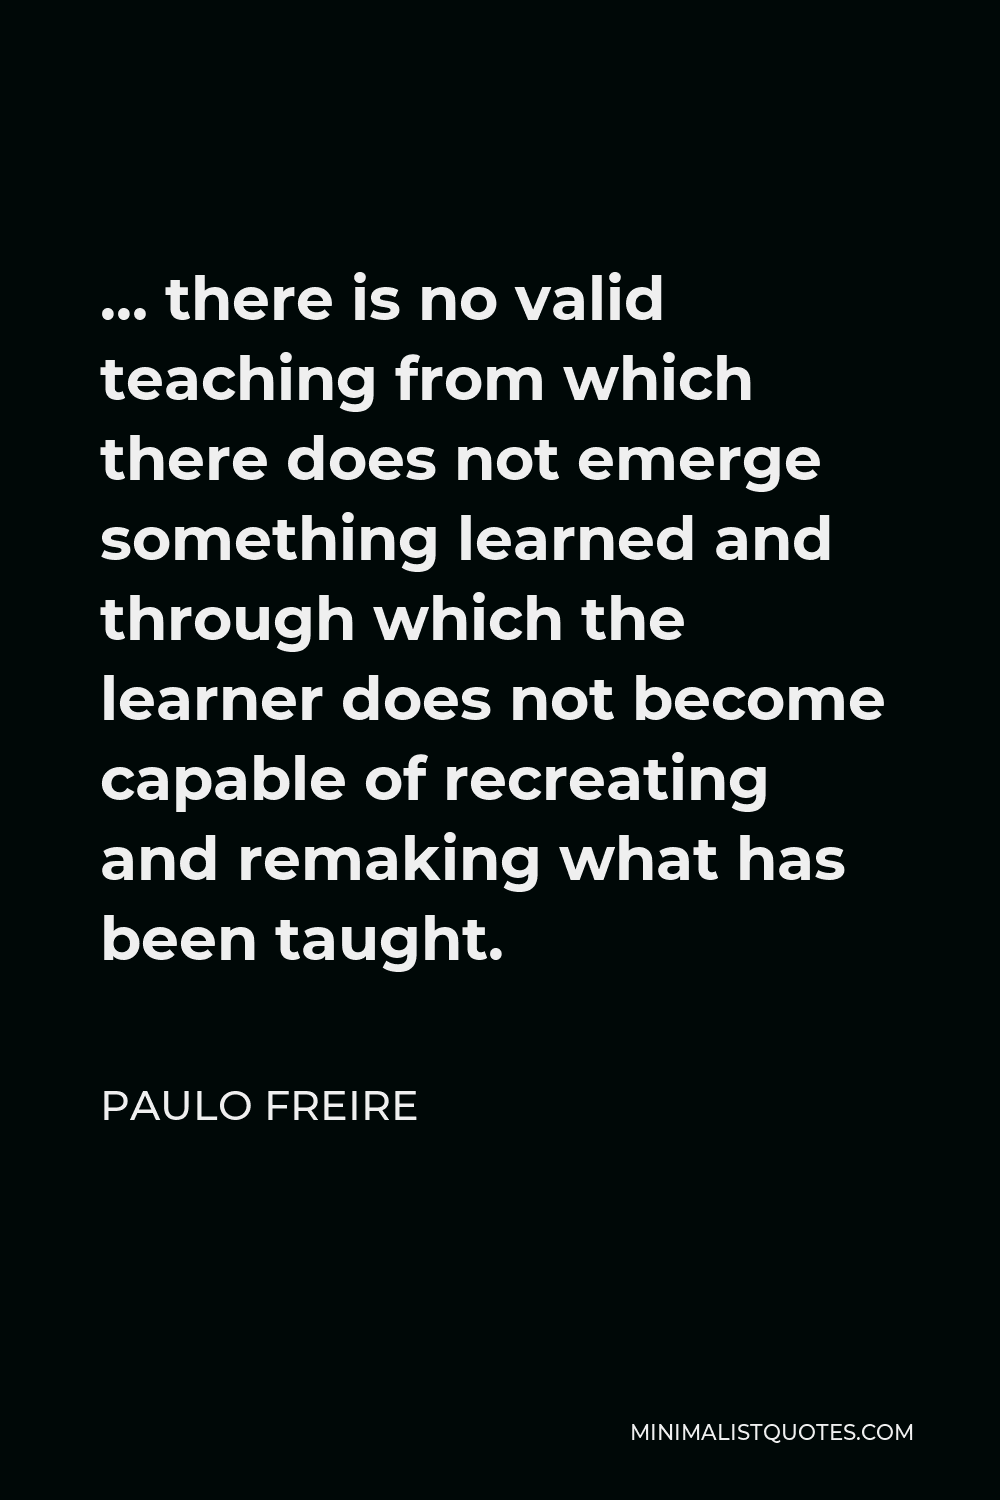 Paulo Freire Quote - … there is no valid teaching from which there does not emerge something learned and through which the learner does not become capable of recreating and remaking what has been taught.